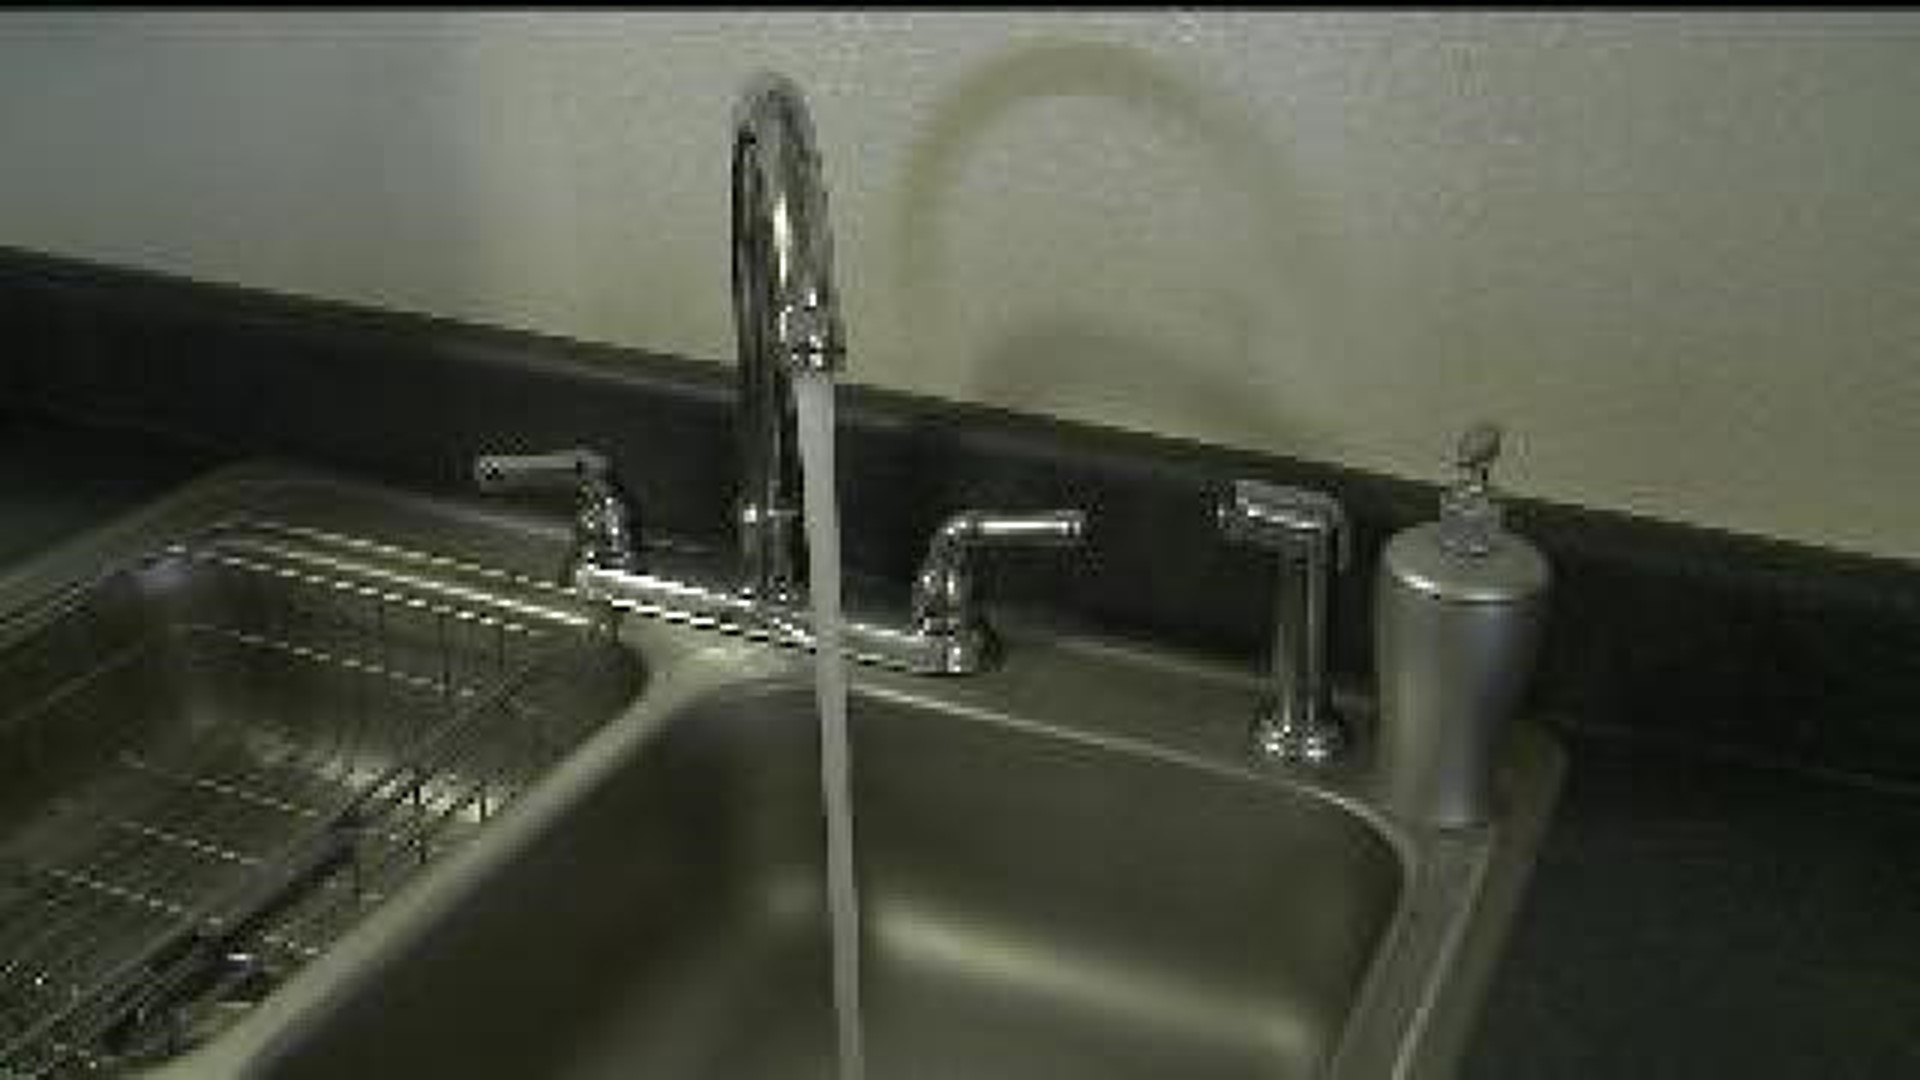 Despite smell, utility company says water is safe